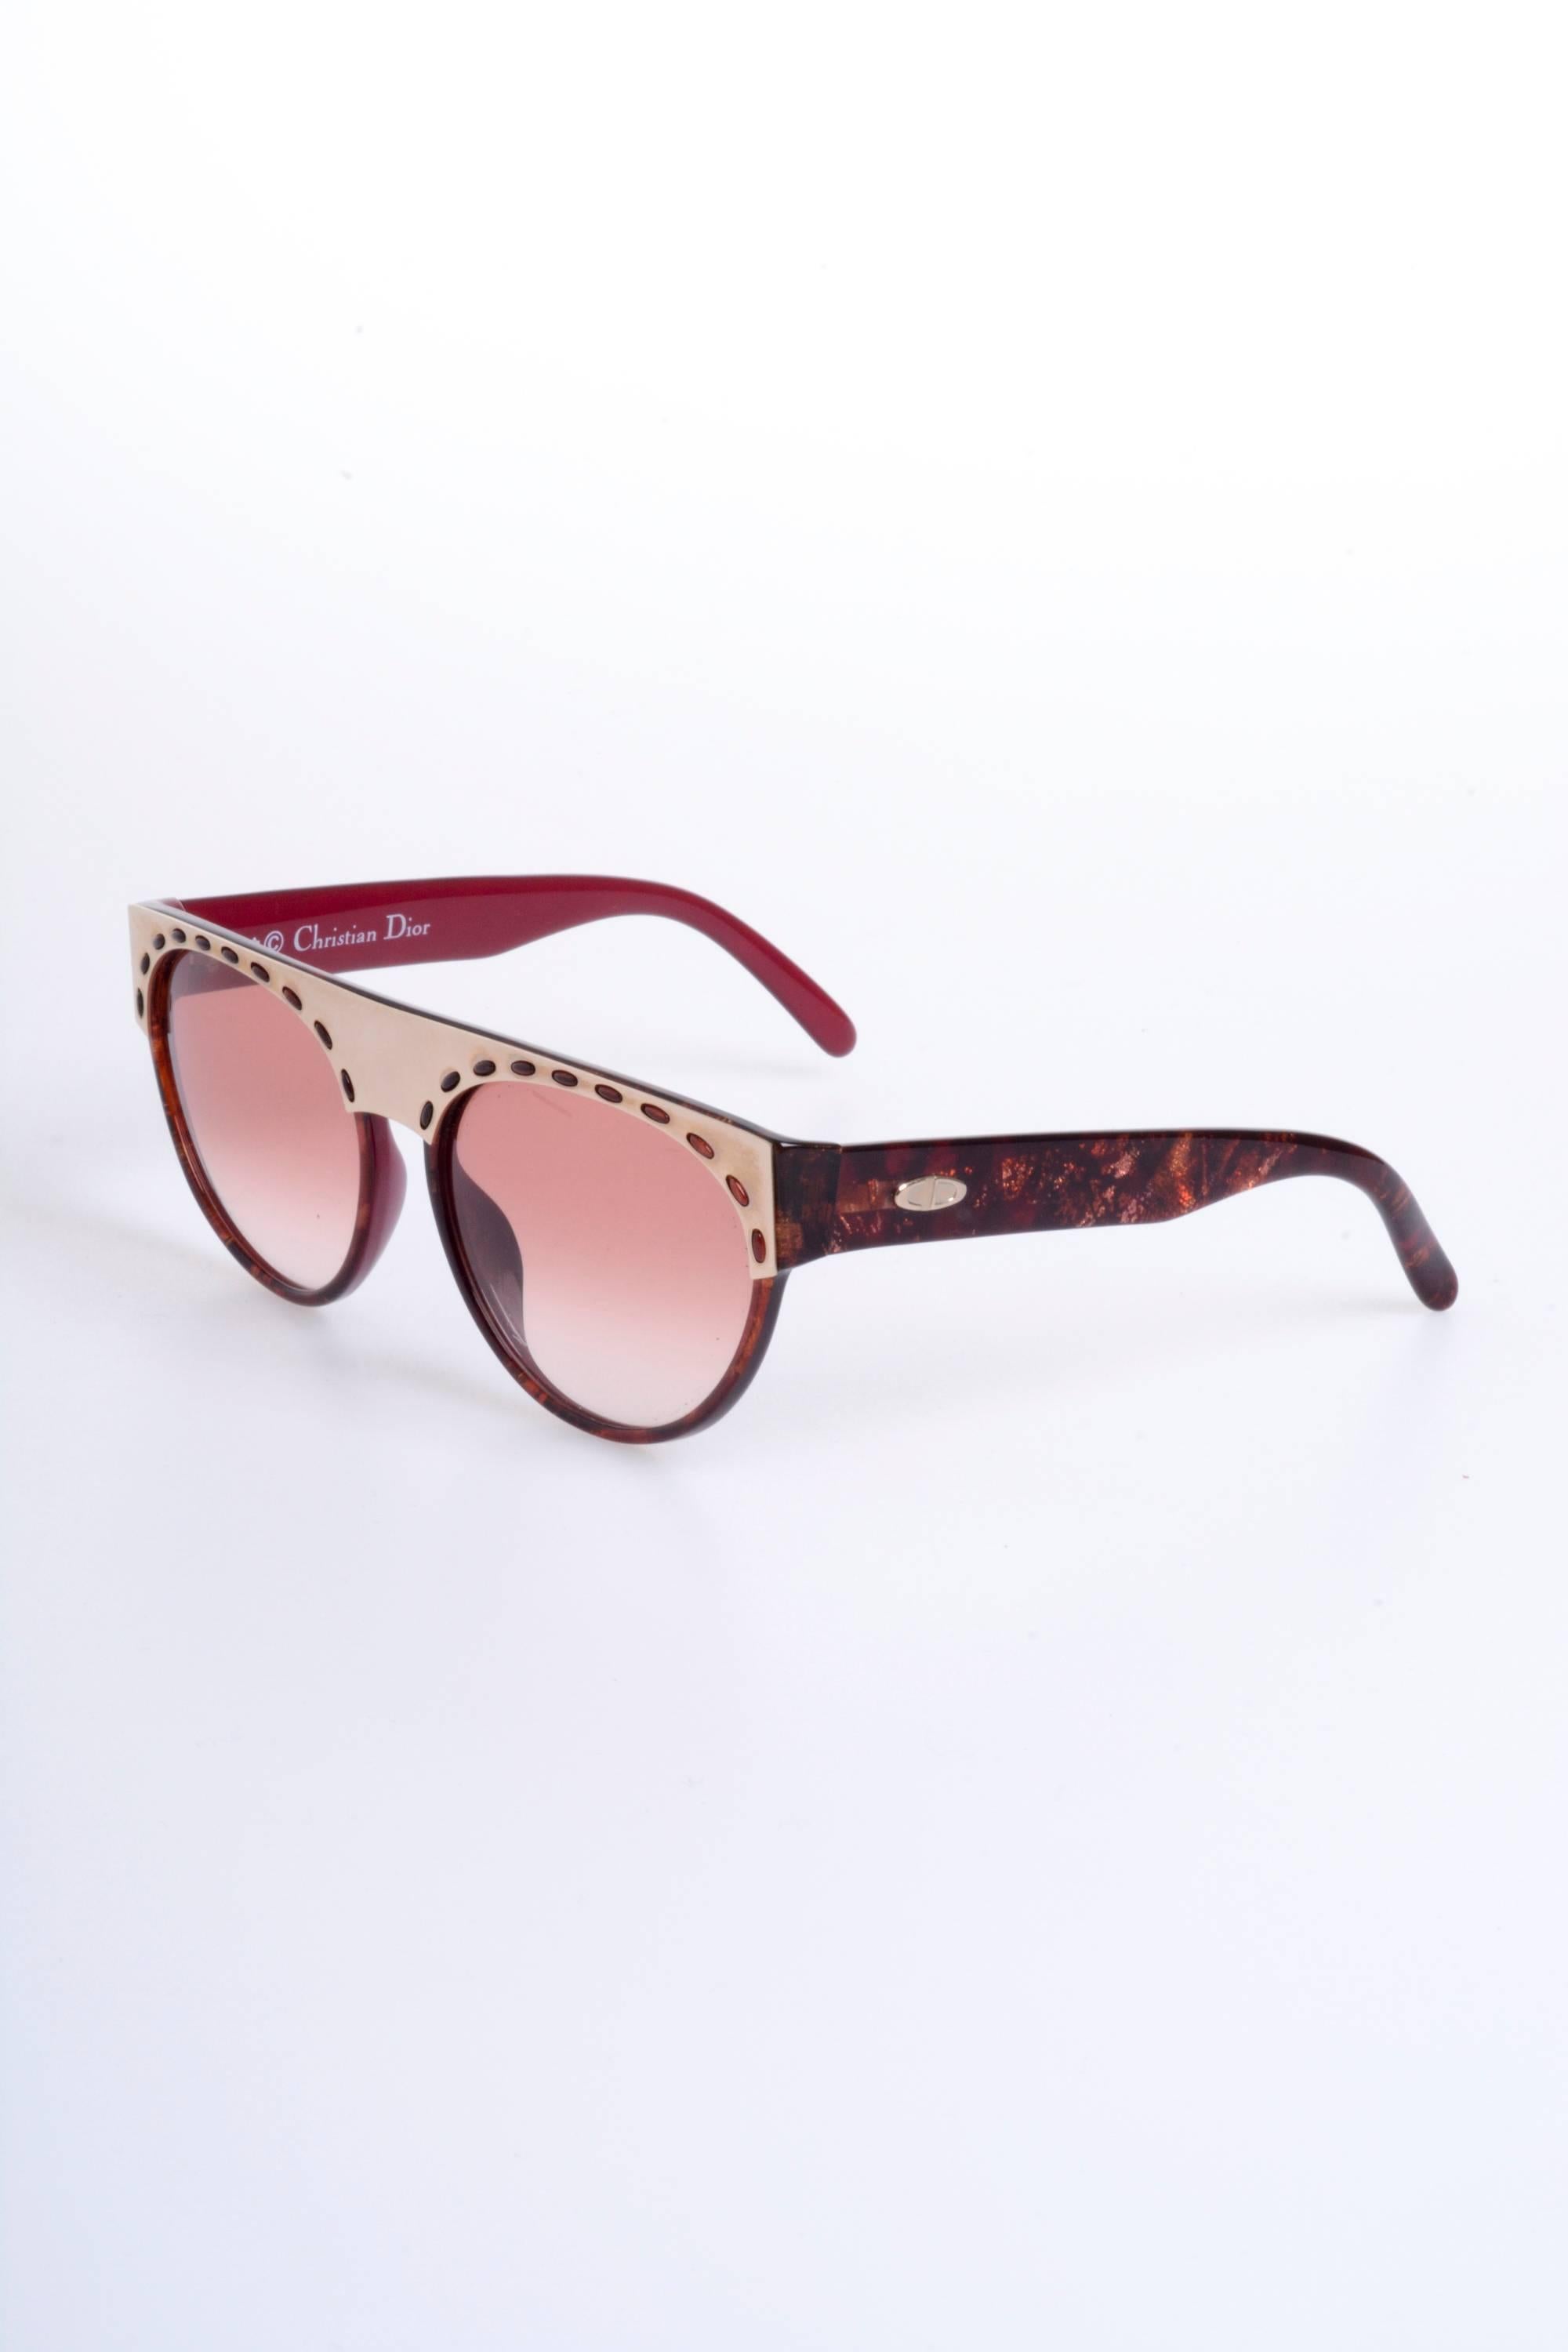 These stunning 1980s CHRISTIAN DIOR Sunglasses are in a burgundy plastic with golden metal detail. The lenses are pink and burgundy. 

Excellent vintage condition 

Brand: Christian Dior - Made in Germany

Measurements:
Temple length: 5,50